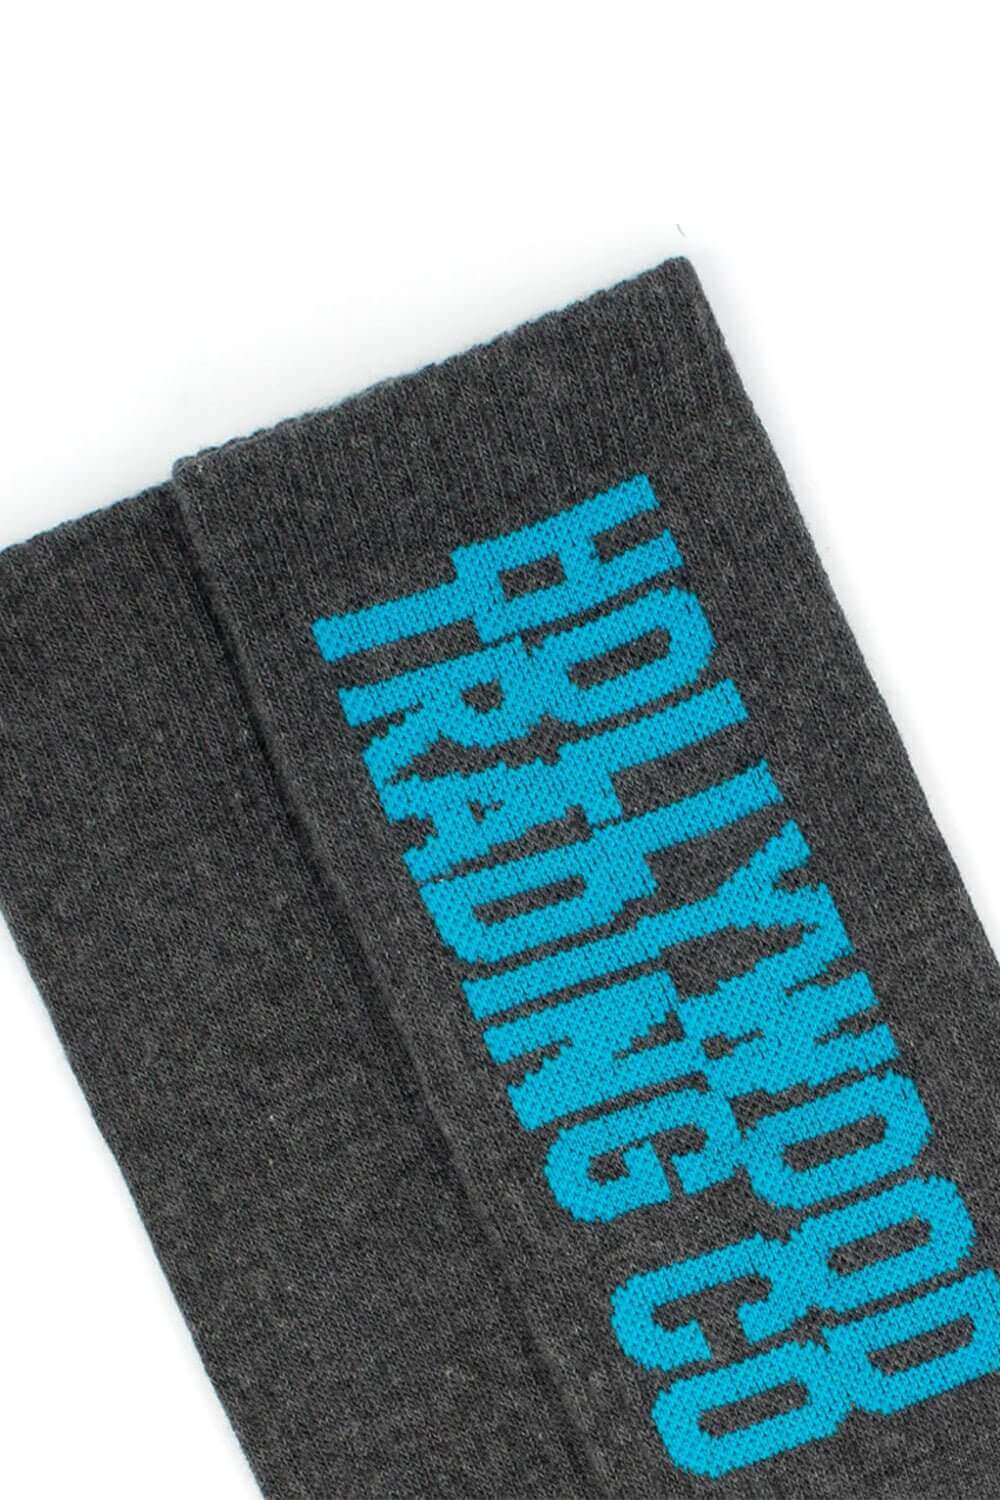 HOLLYWOOD T.C. WOMAN SOCKS Signature woman socks with Hollywood Trading Co script logo. 85% Cotton 10% Polyamide 5% Elastane. Made in Italy HTC LOS ANGELES